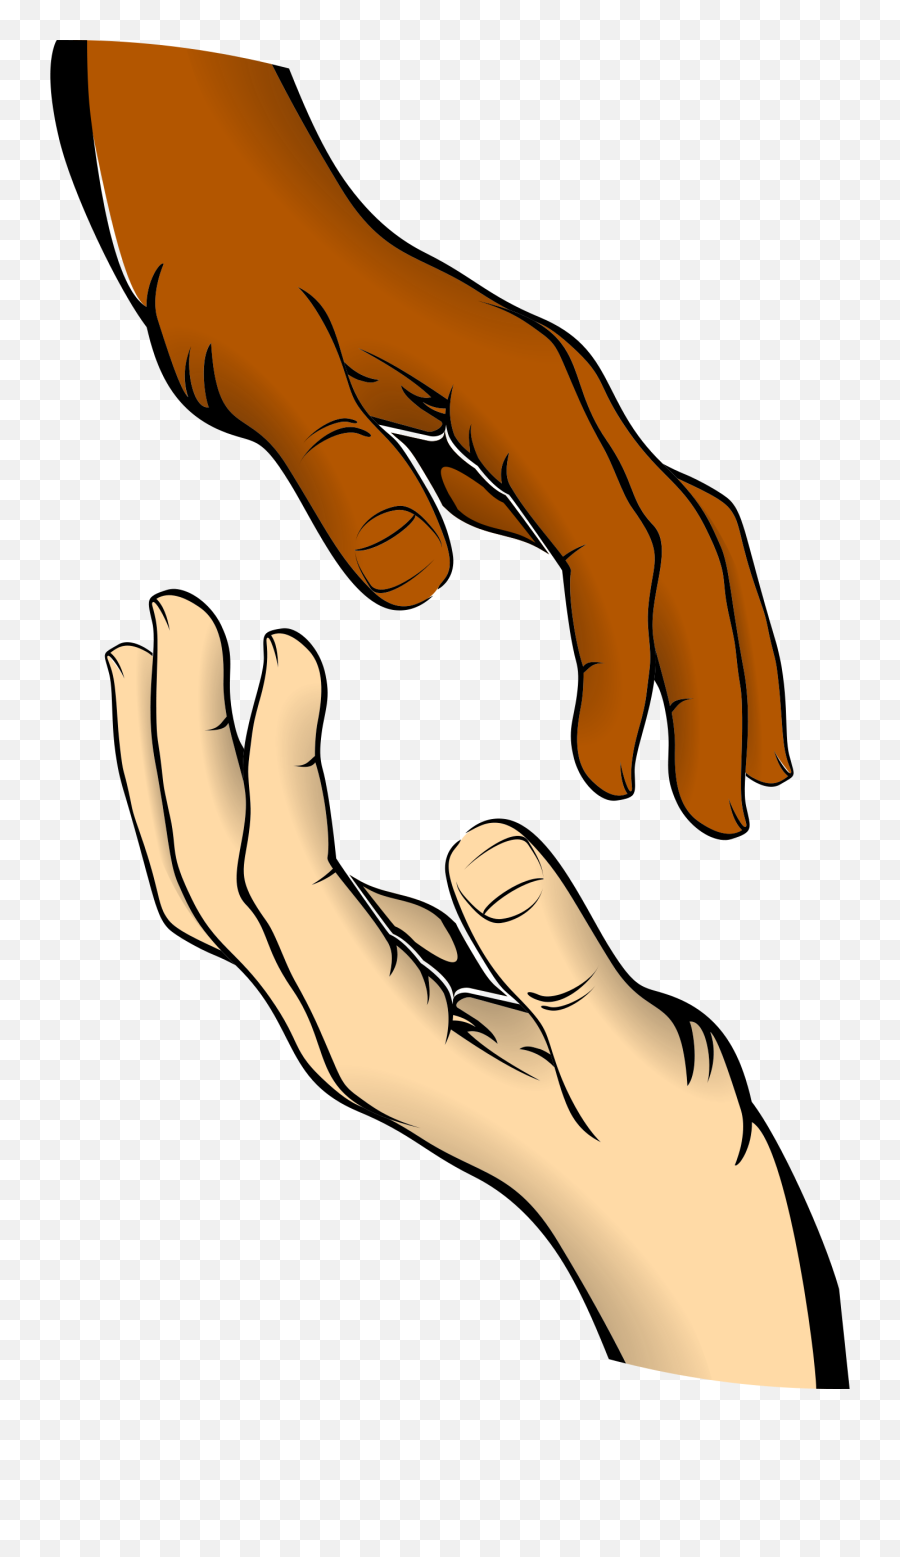 Inadequate Physical Touch Has Health - Hands Touching Clipart Emoji,Sheldon Cooper Lots Of Emotion